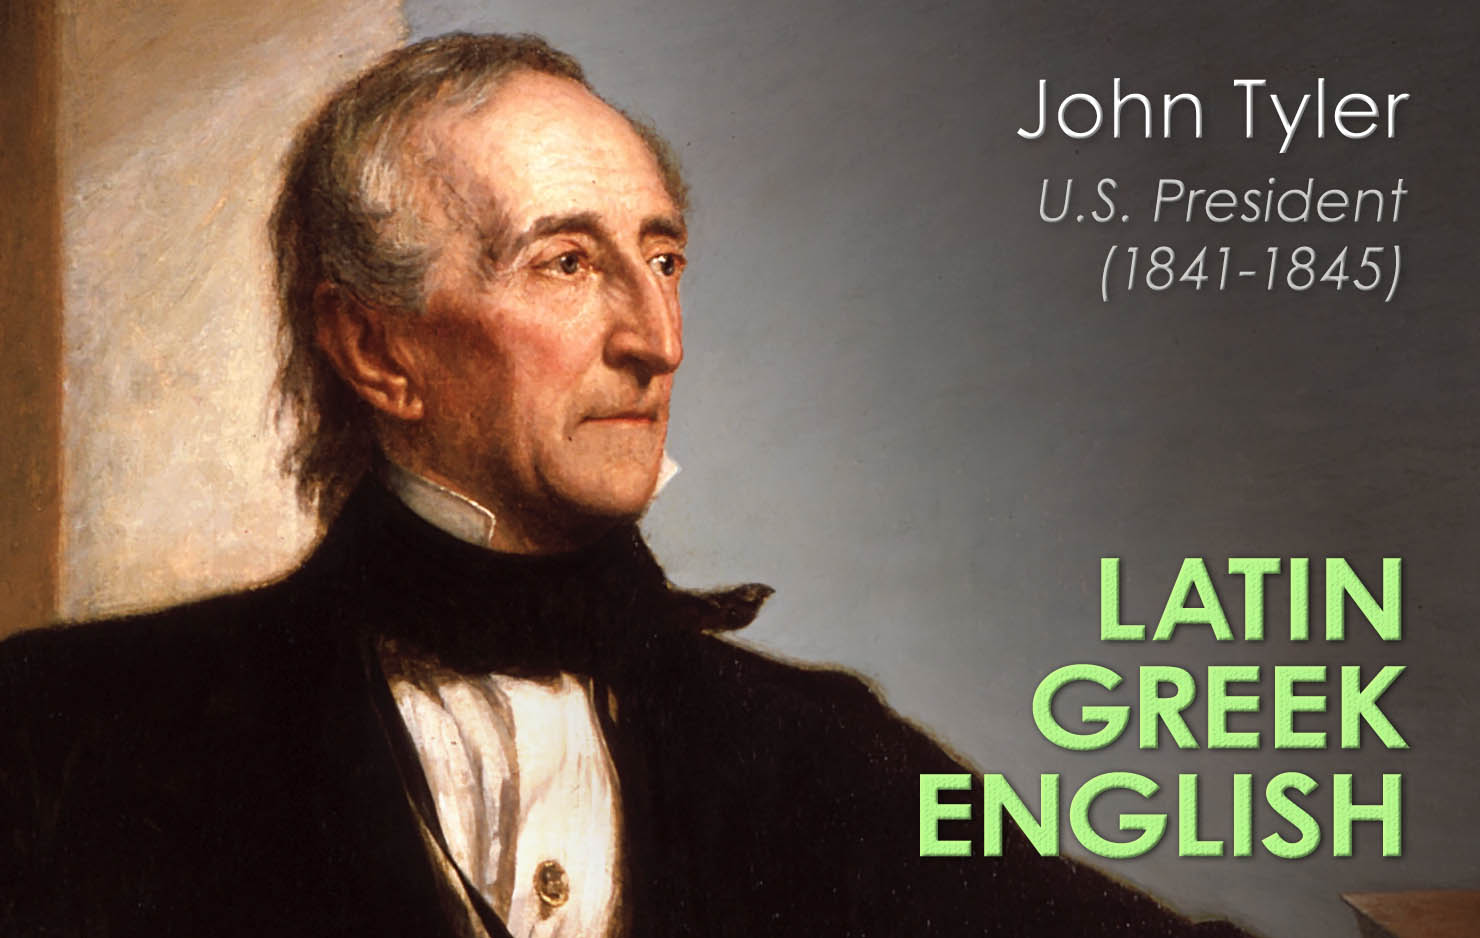 John Tyler excelled at school, where he learned both Latin and Greek.